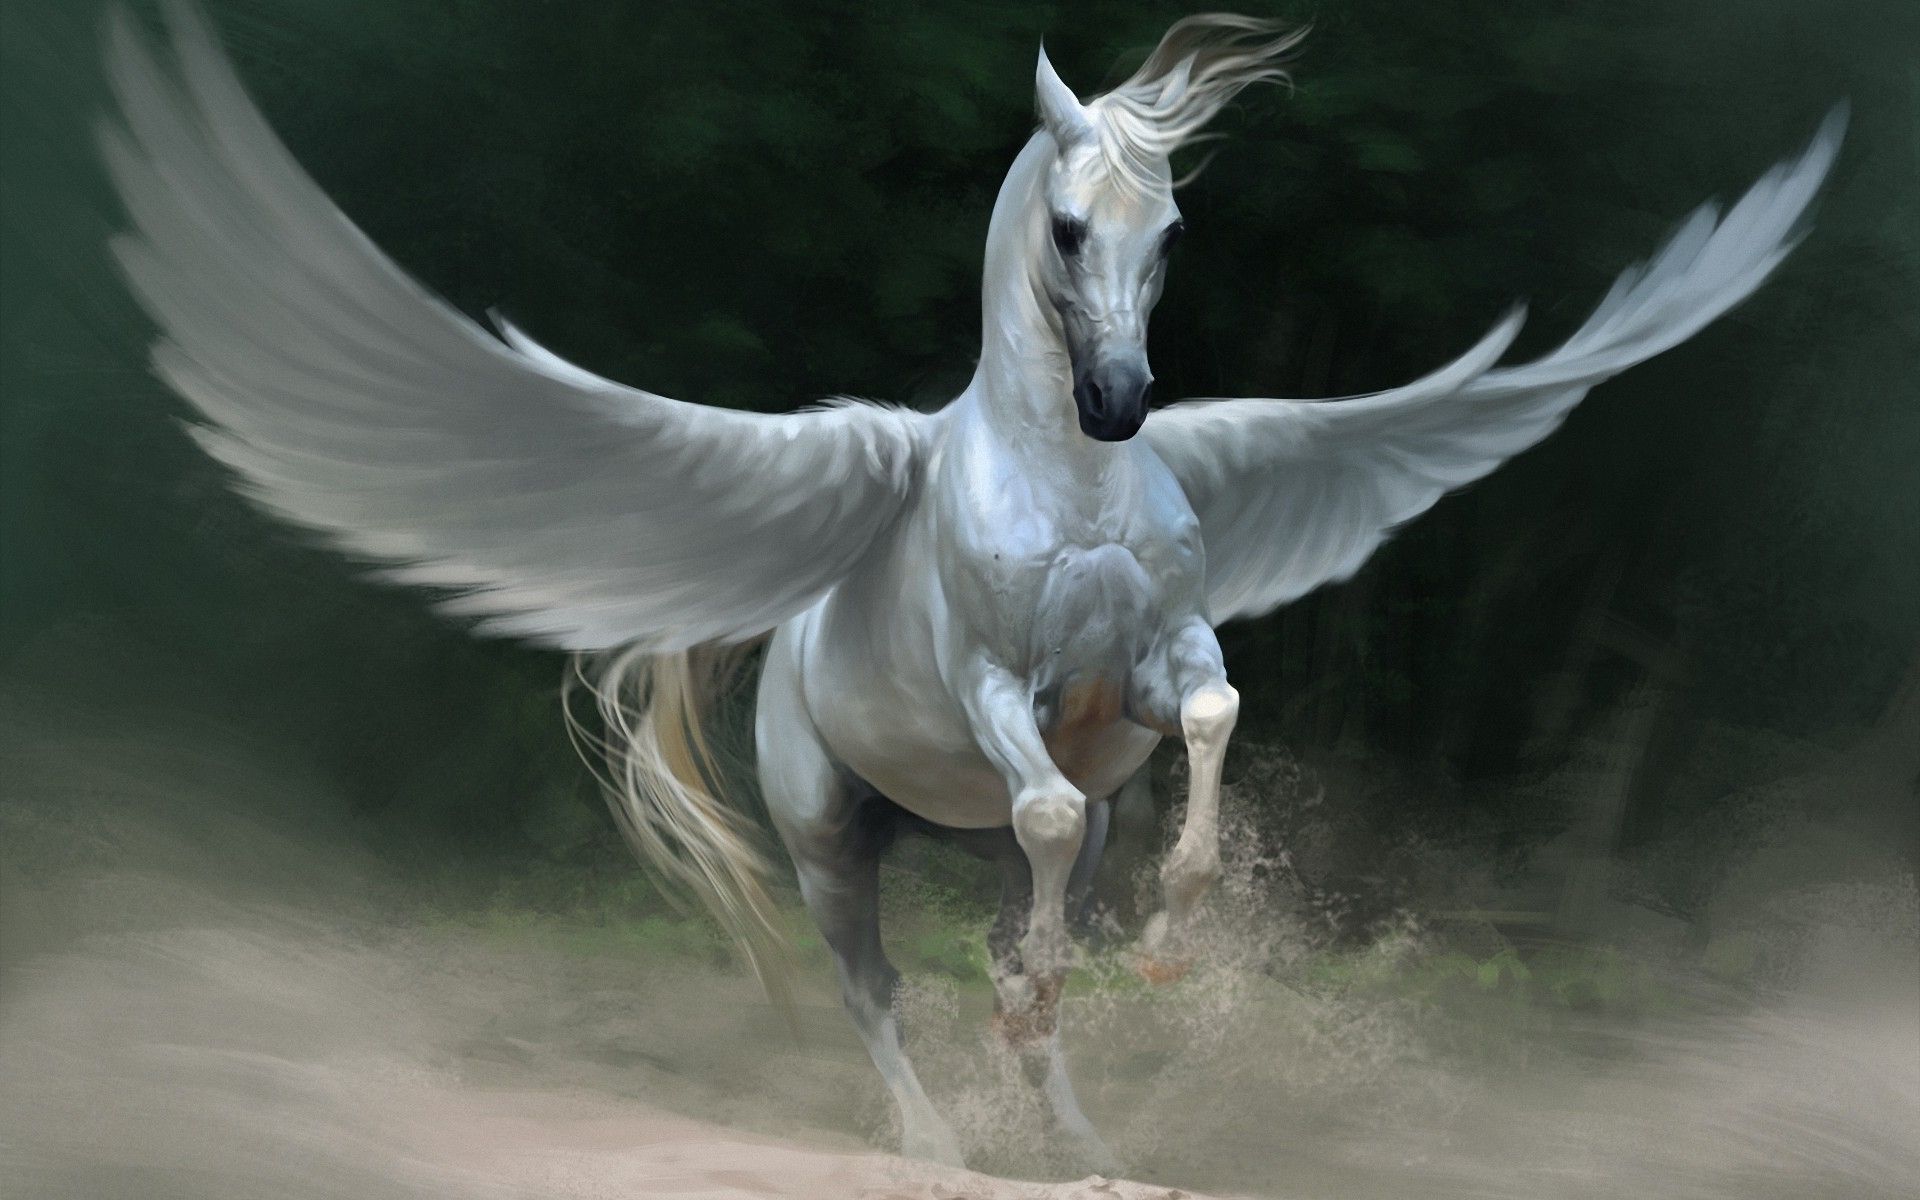 winged horse picture. Flying horses wallpaper and image. Horse wallpaper, Greek mythological creatures, Winged horse